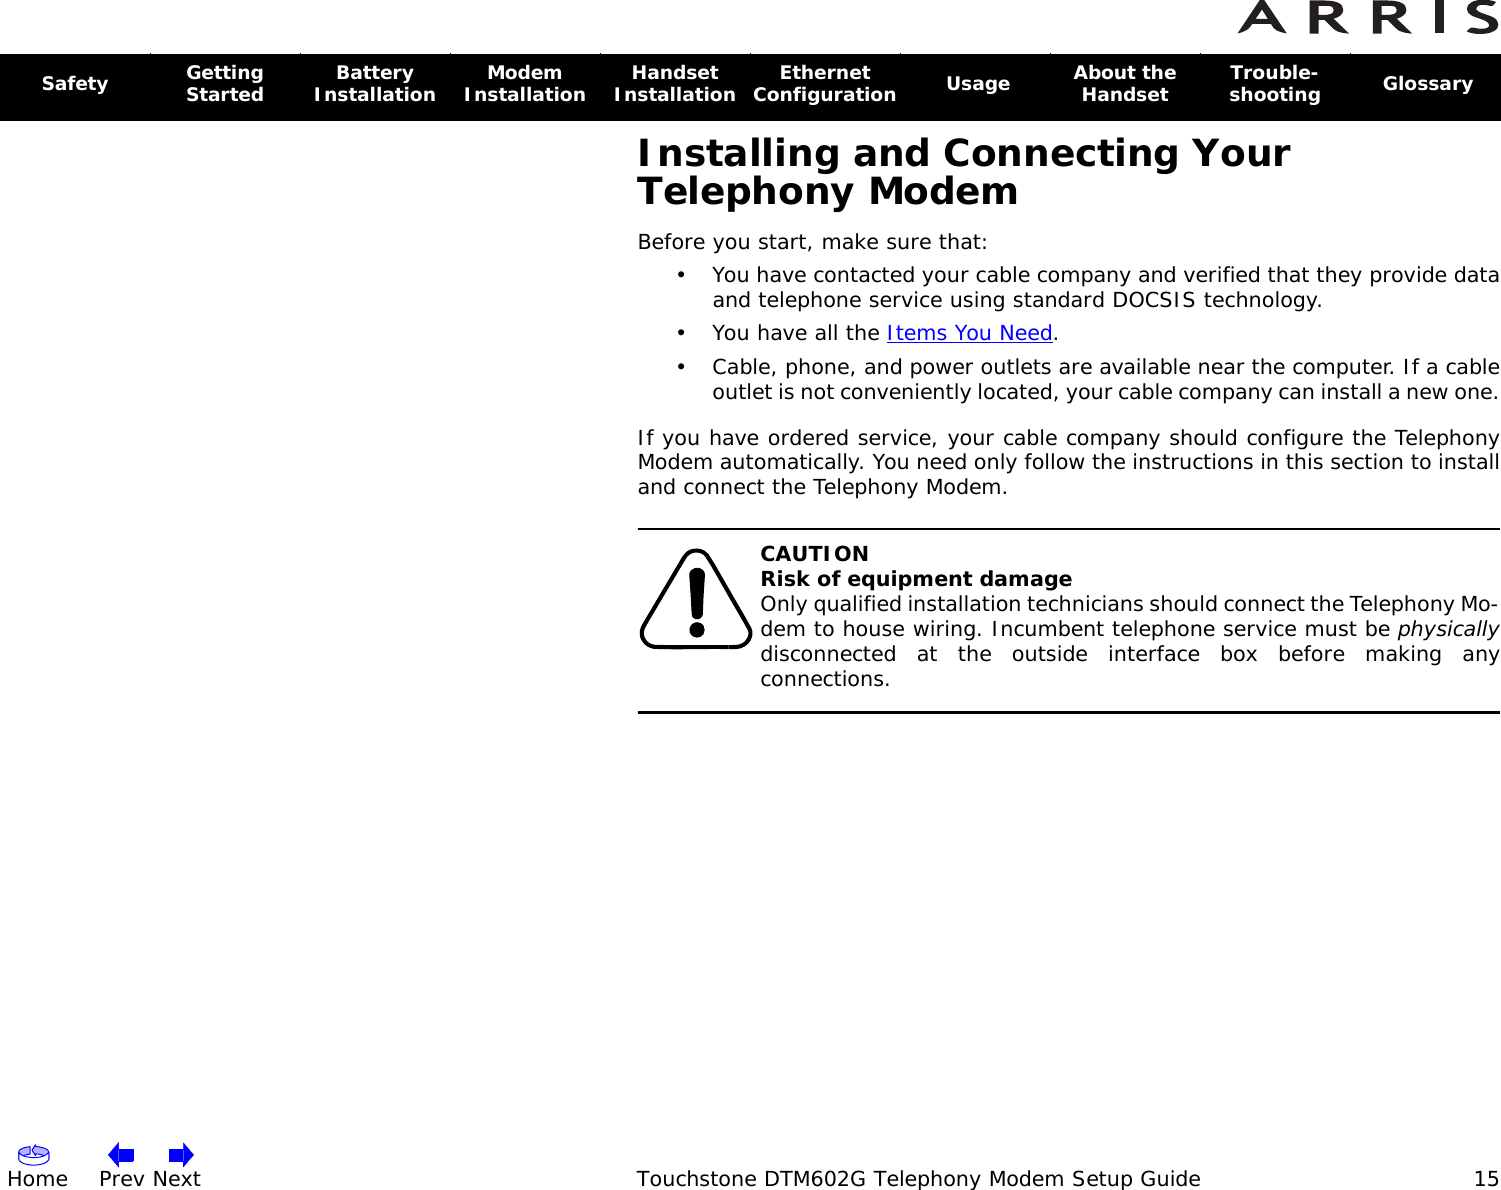 Home Prev Next Touchstone DTM602G Telephony Modem Setup Guide 15Safety Getting Started Battery Installation Modem Installation Handset Installation Ethernet Configuration  Usage About the Handset Trouble-shooting  GlossaryInstalling and Connecting Your Telephony ModemBefore you start, make sure that:• You have contacted your cable company and verified that they provide data and telephone service using standard DOCSIS technology.•You have all the Items You Need.• Cable, phone, and power outlets are available near the computer. If a cable outlet is not conveniently located, your cable company can install a new one.If you have ordered service, your cable company should configure the Telephony Modem automatically. You need only follow the instructions in this section to install and connect the Telephony Modem.CAUTIONRisk of equipment damageOnly qualified installation technicians should connect the Telephony Mo-dem to house wiring. Incumbent telephone service must be physicallydisconnected at the outside interface box before making any connections.